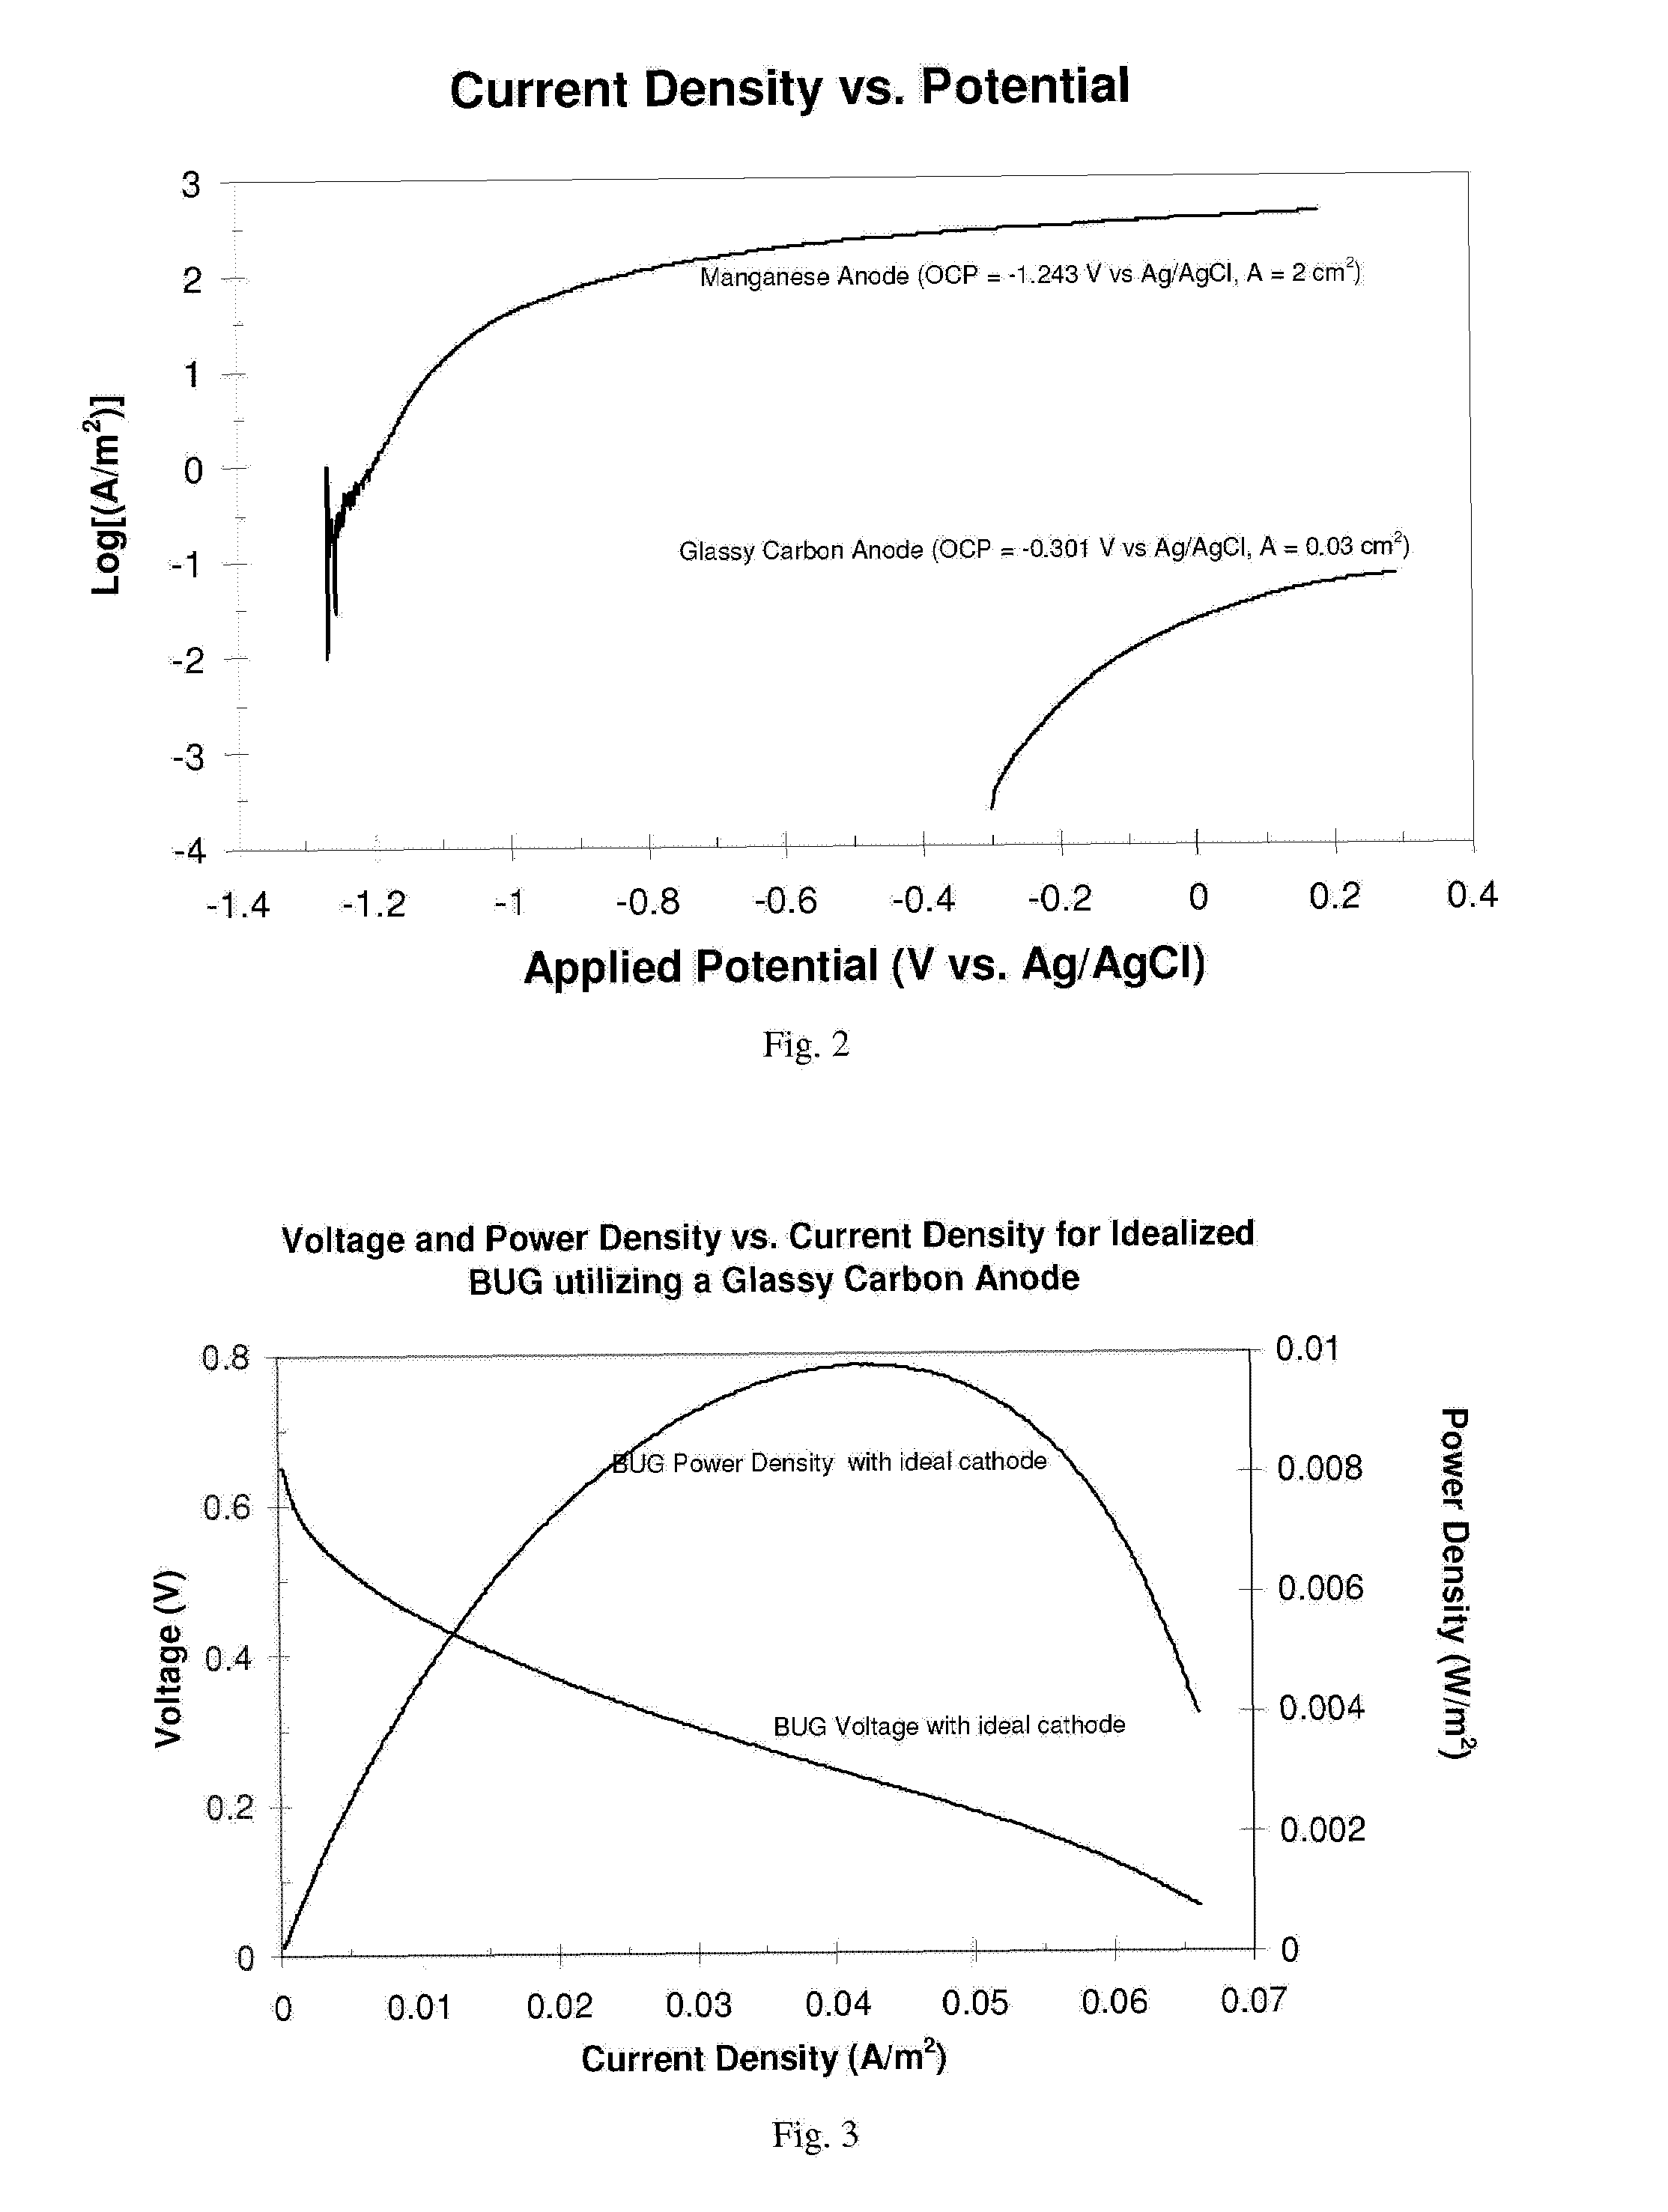 Apparatus equipped with metallic manganese anode for generating power from voltage gradients at the sediment-water interface